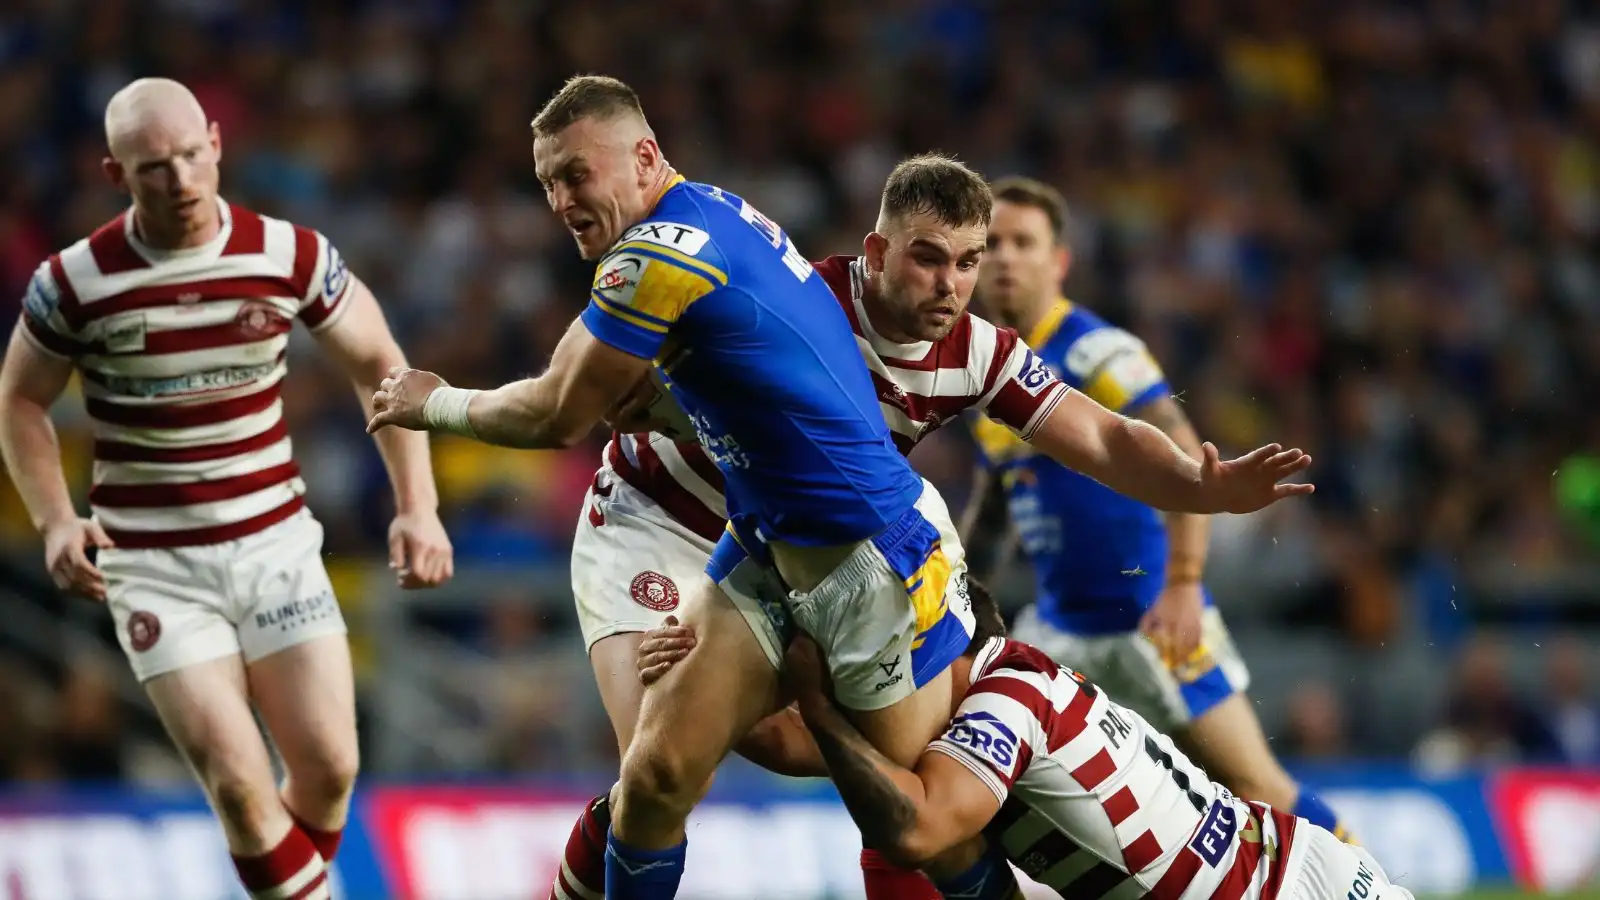 Leeds coach makes major decisions on Harry Newman and James Bentley